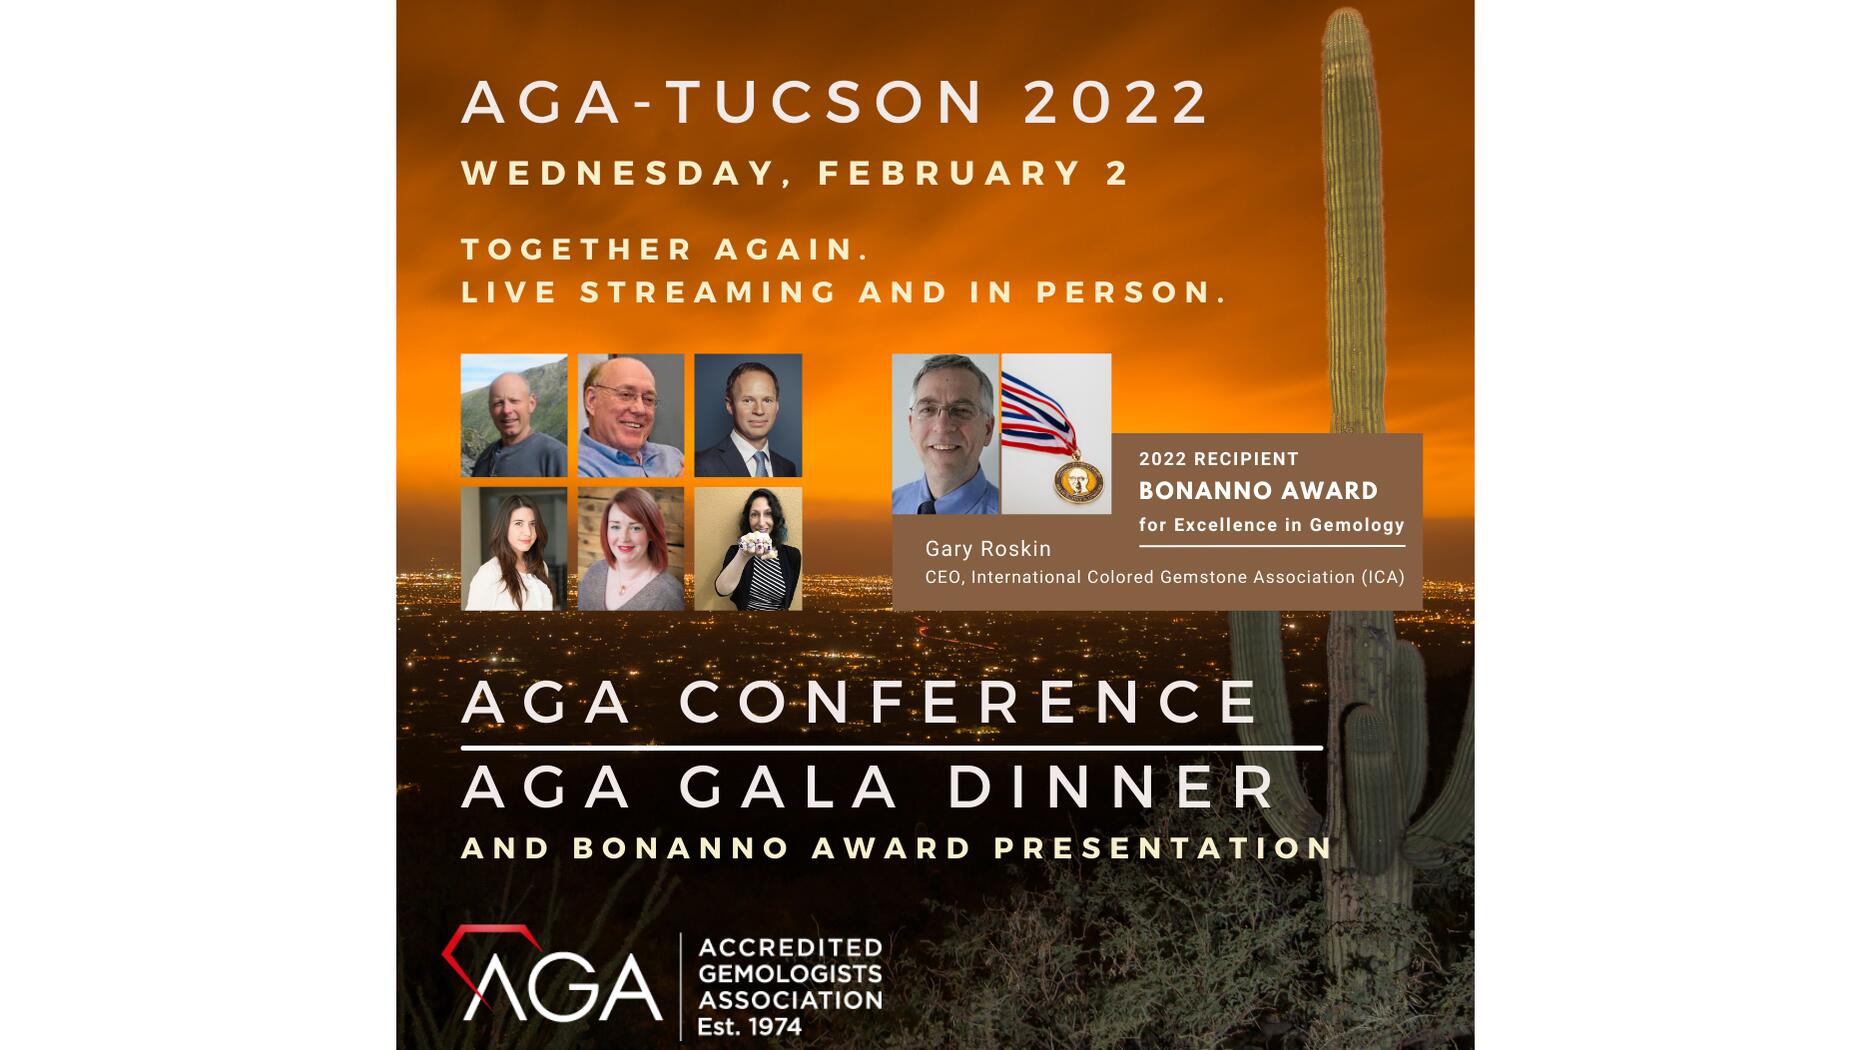 Here’s What AGA Has on Tap for Its 2022 Tucson Conference 